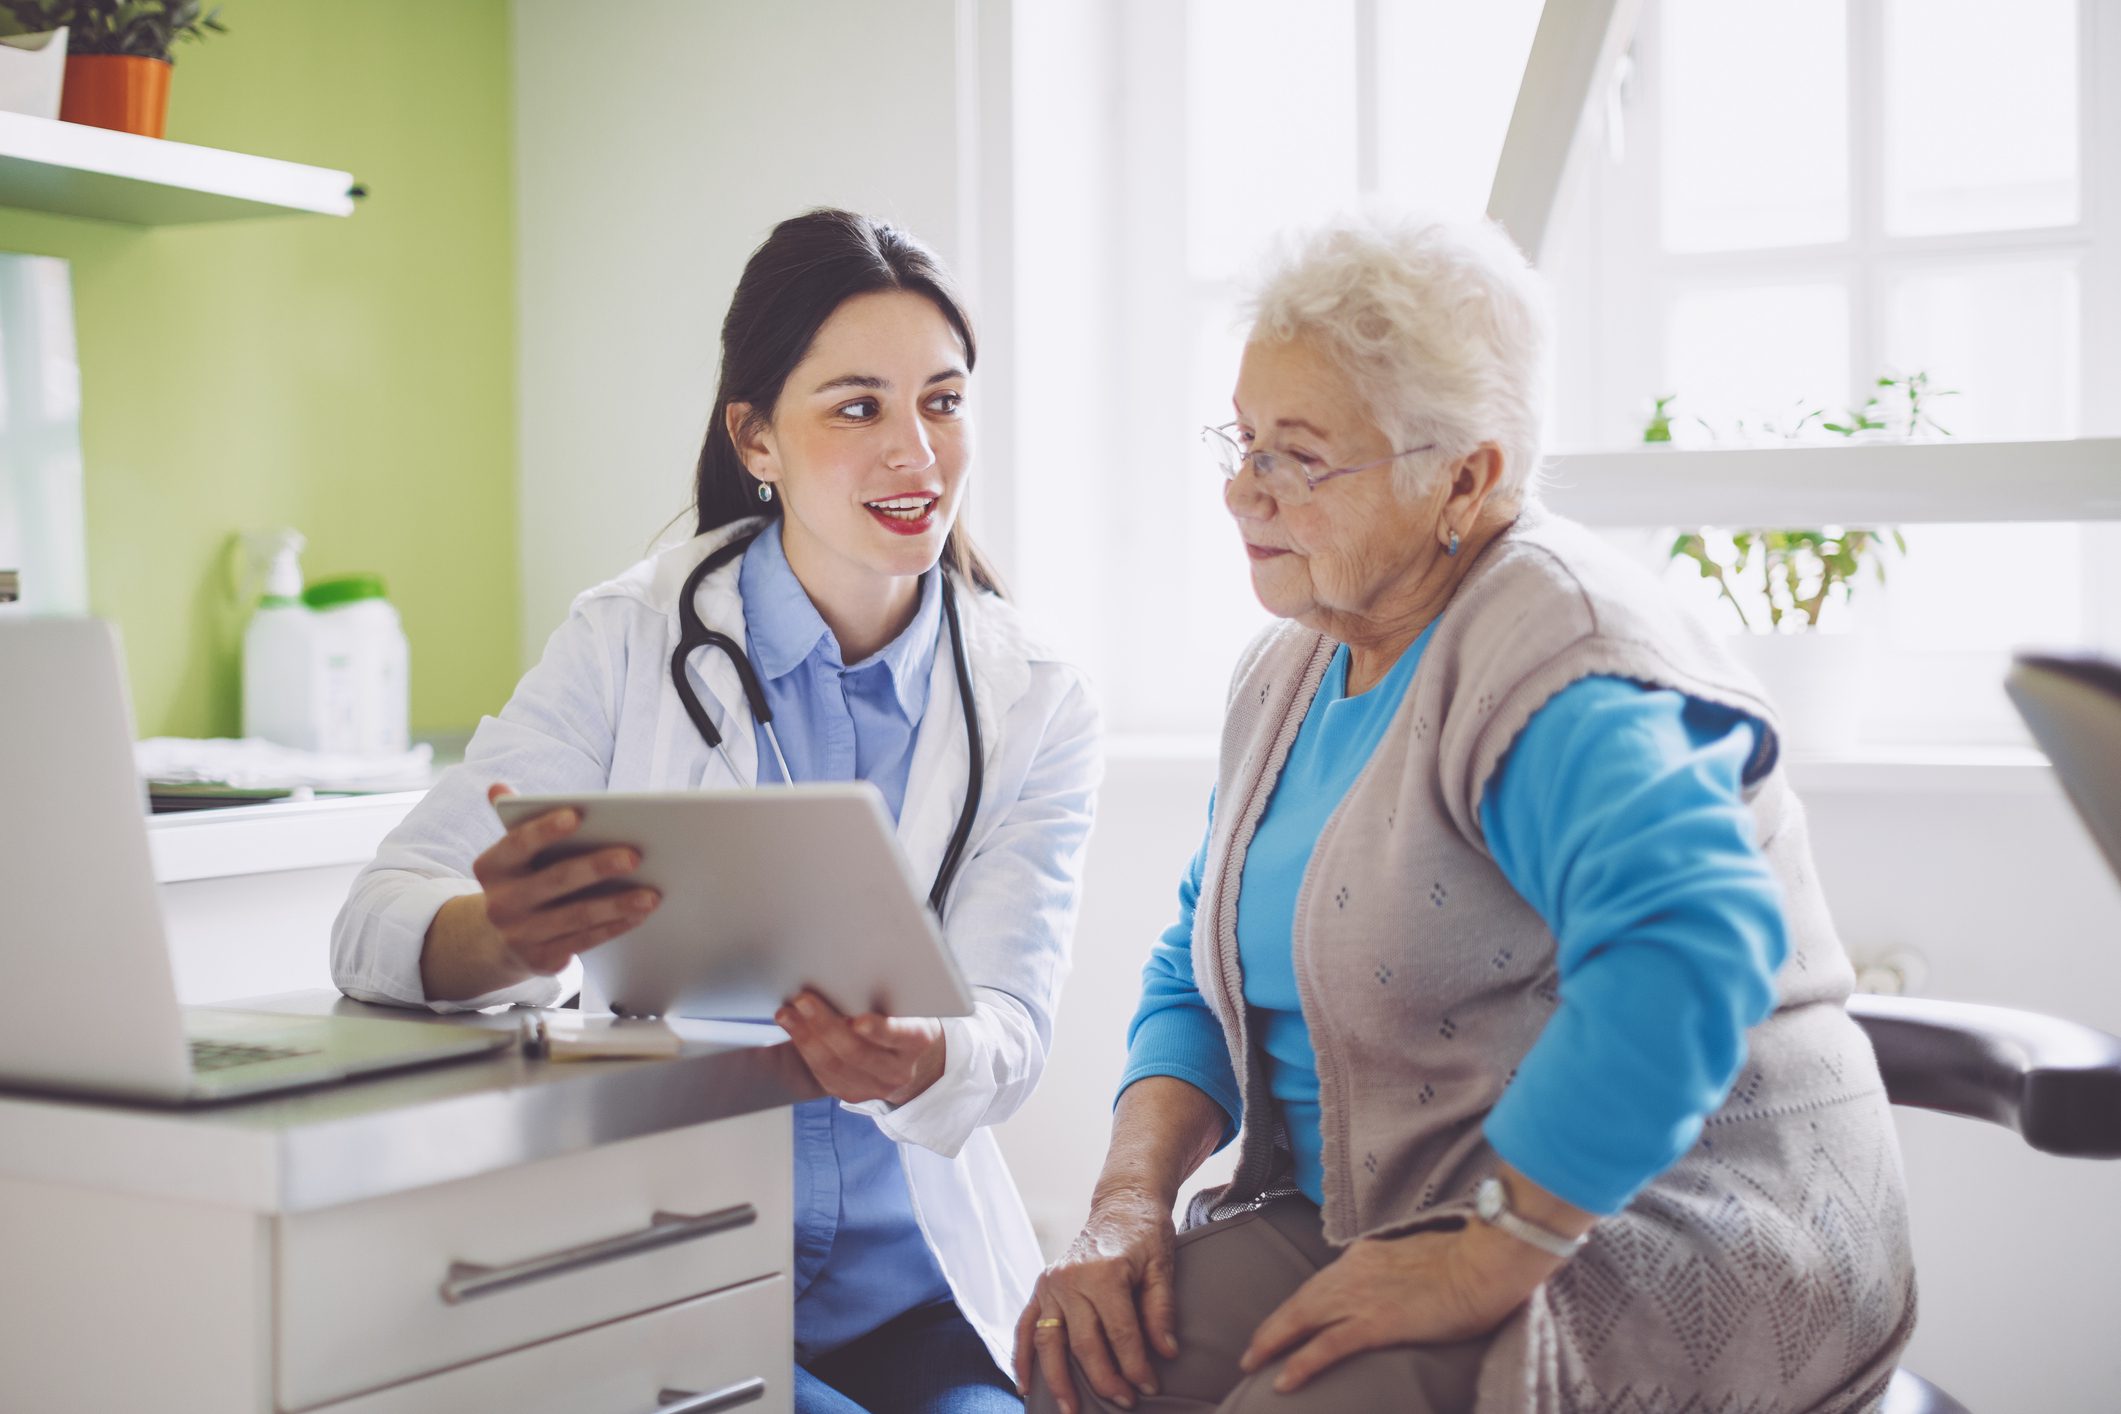 Older patient at doctor's office with doctor reviewing results on a tablet